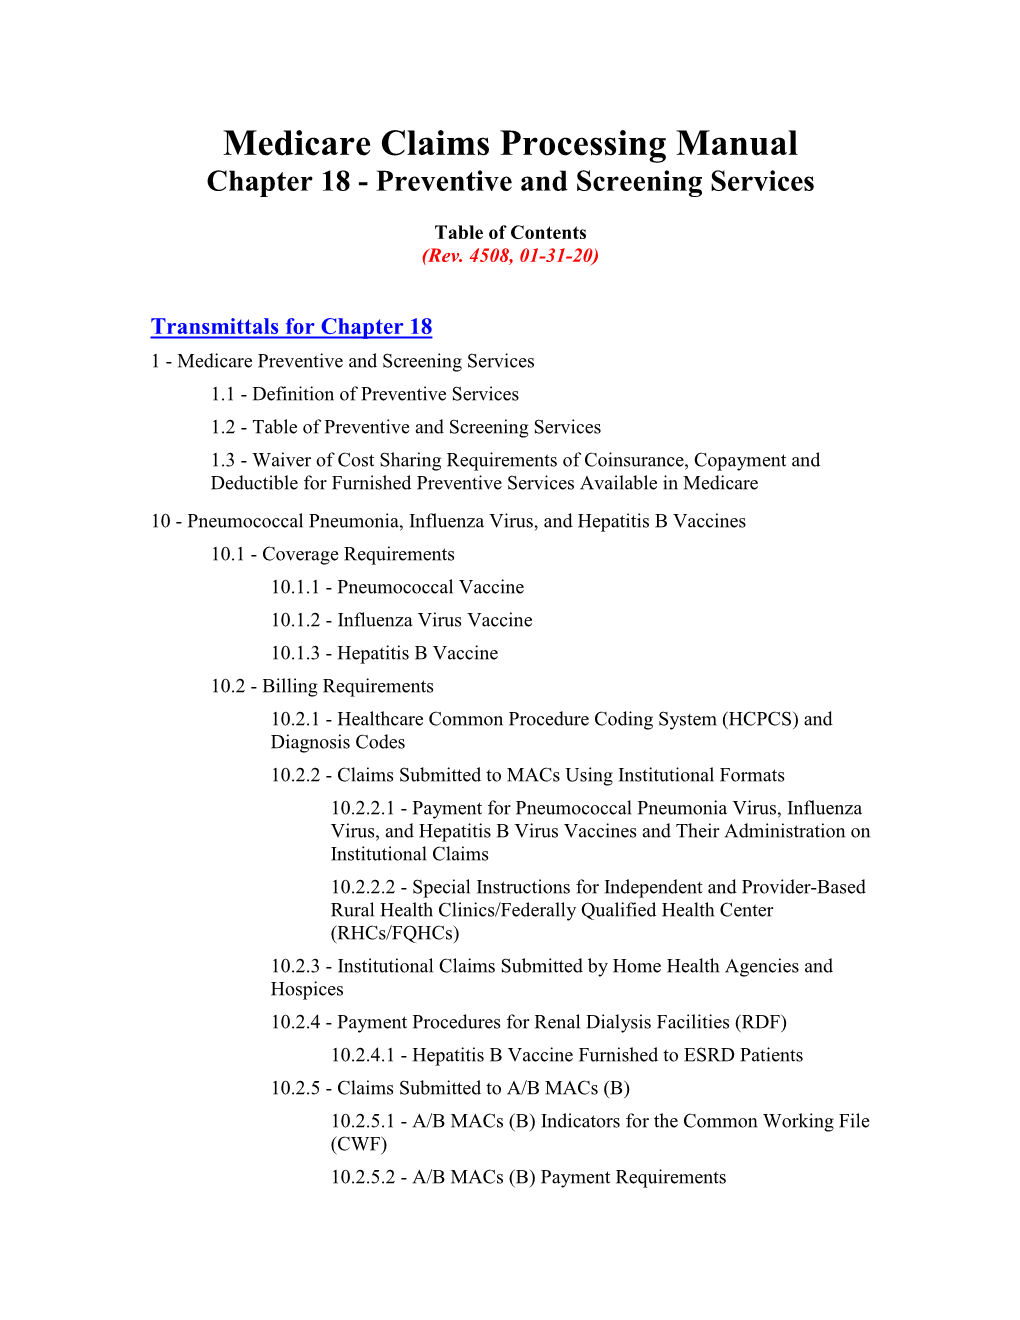 Medicare Claims Processing Manual, Chapter 18 – Preventive and Screening Services